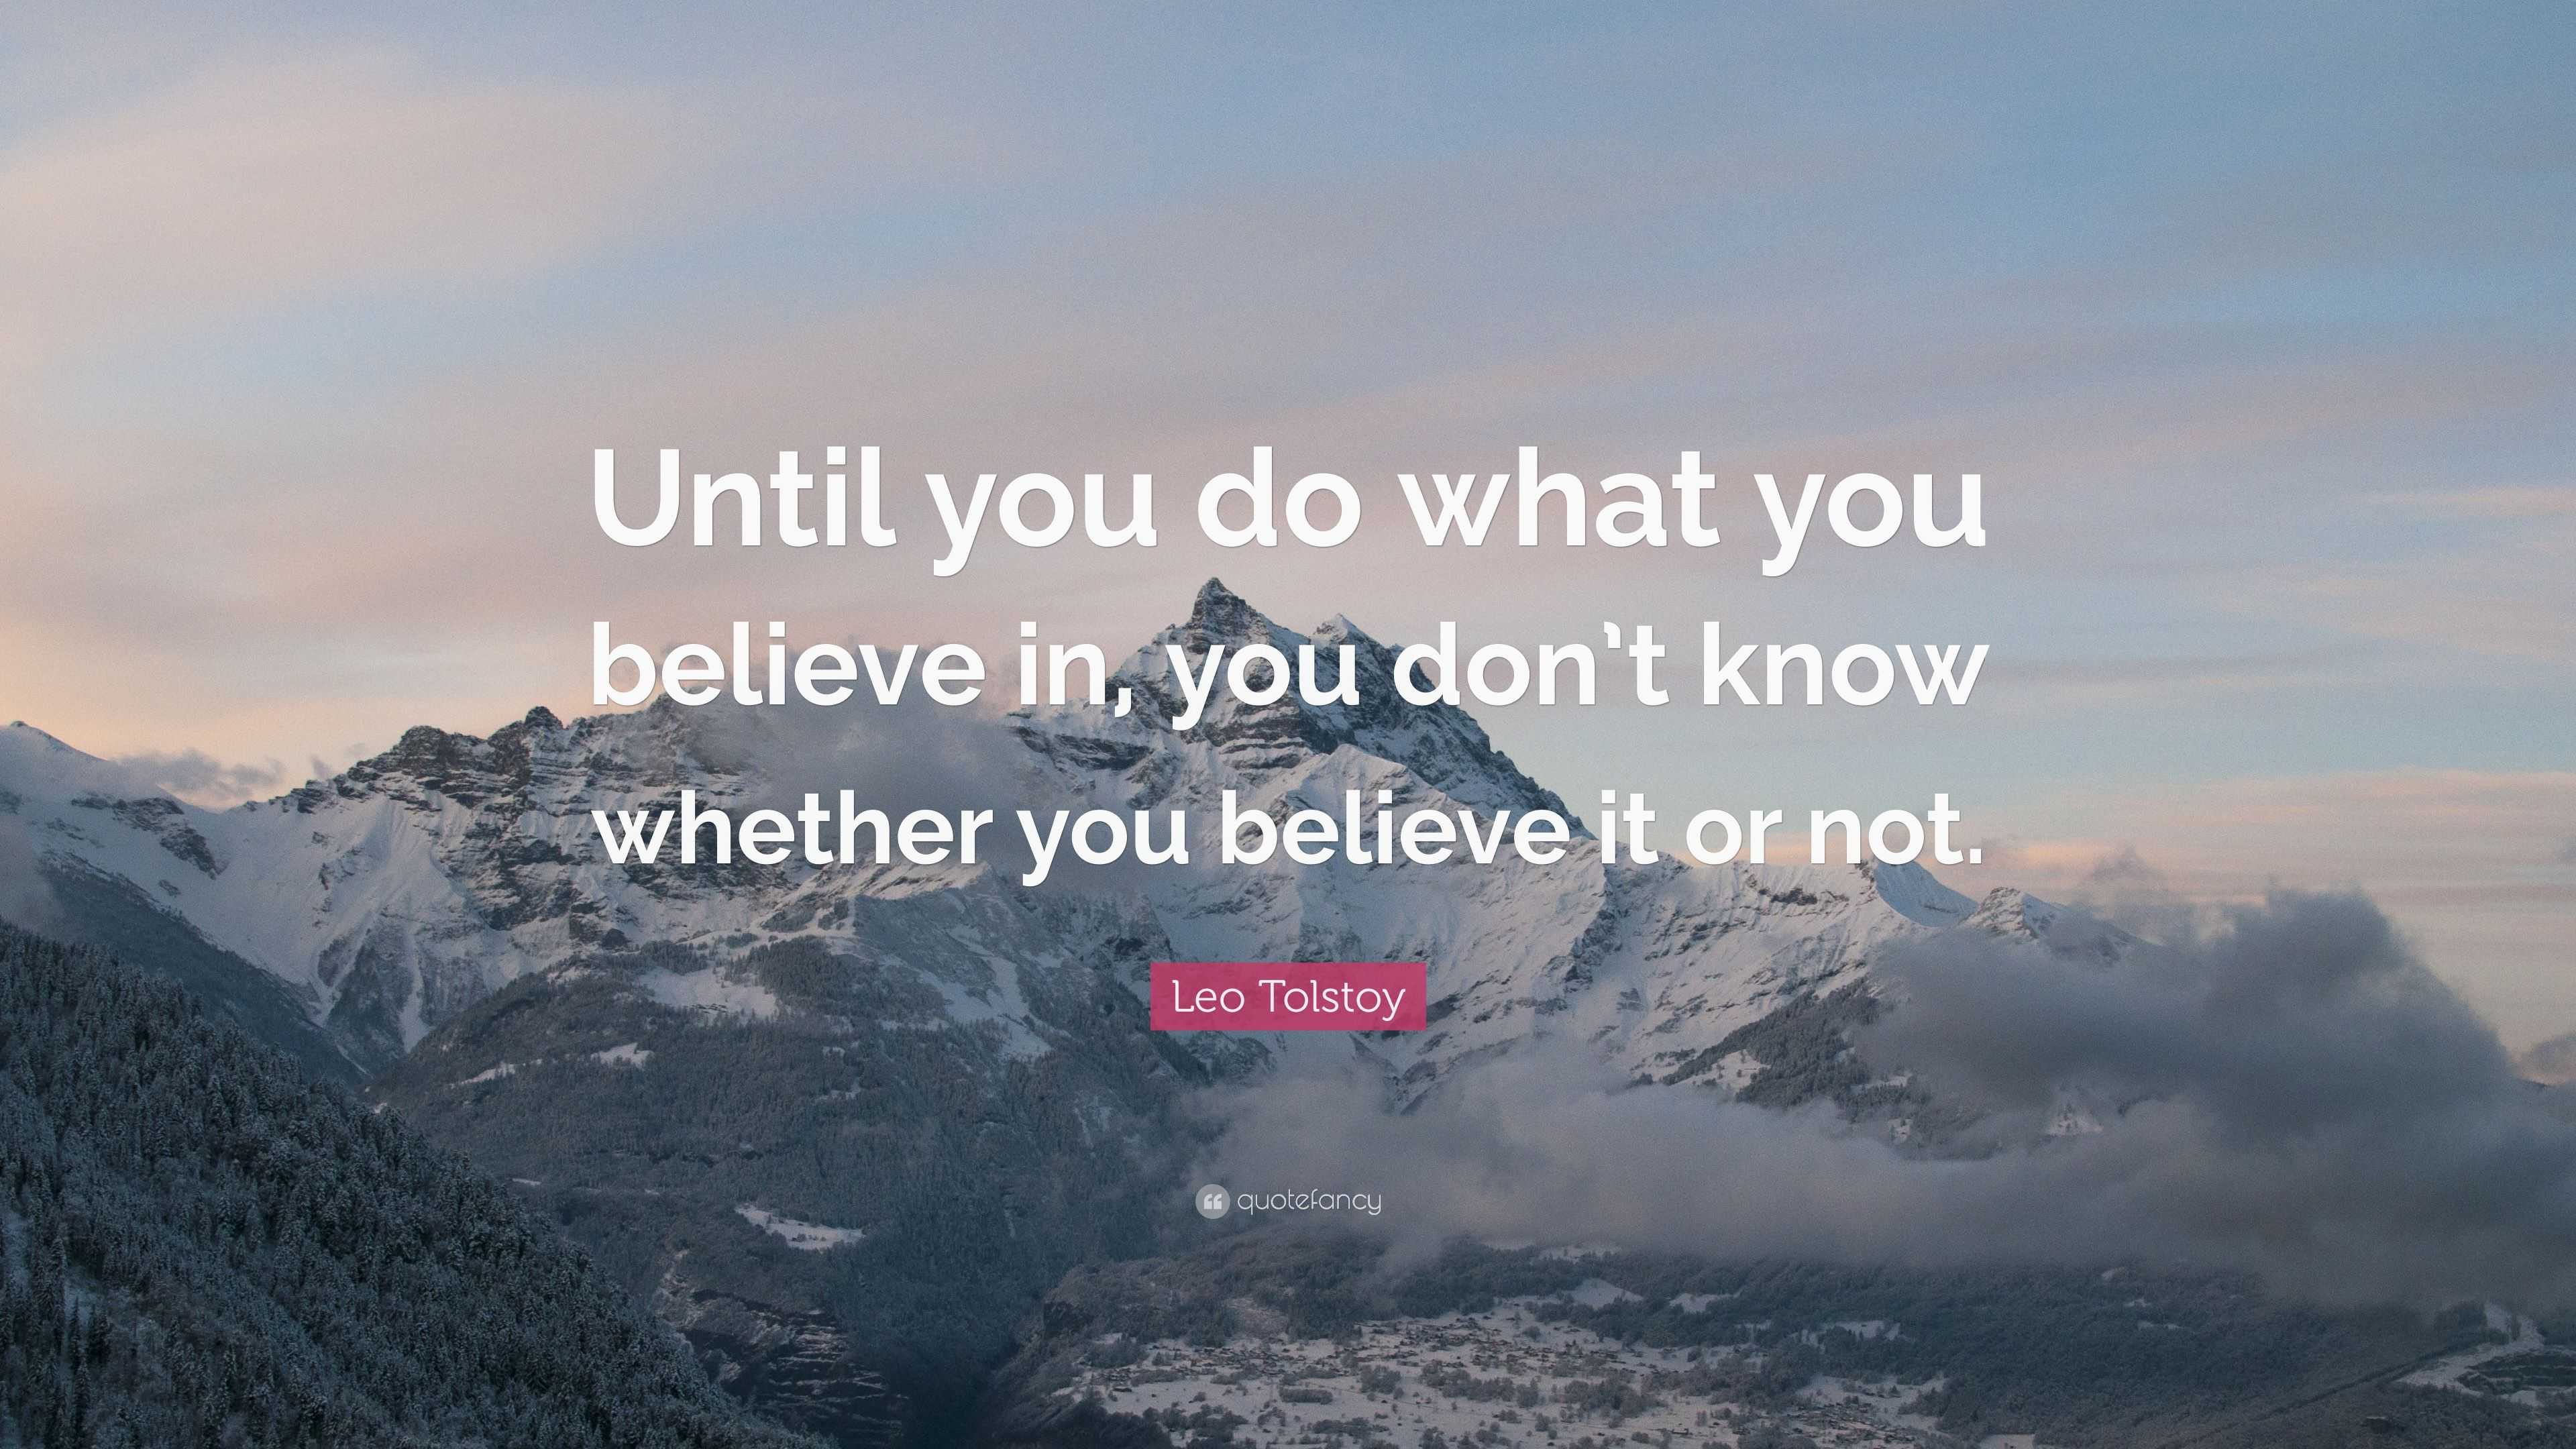 Leo Tolstoy Quote: “Until you do what you believe in, you don’t know ...